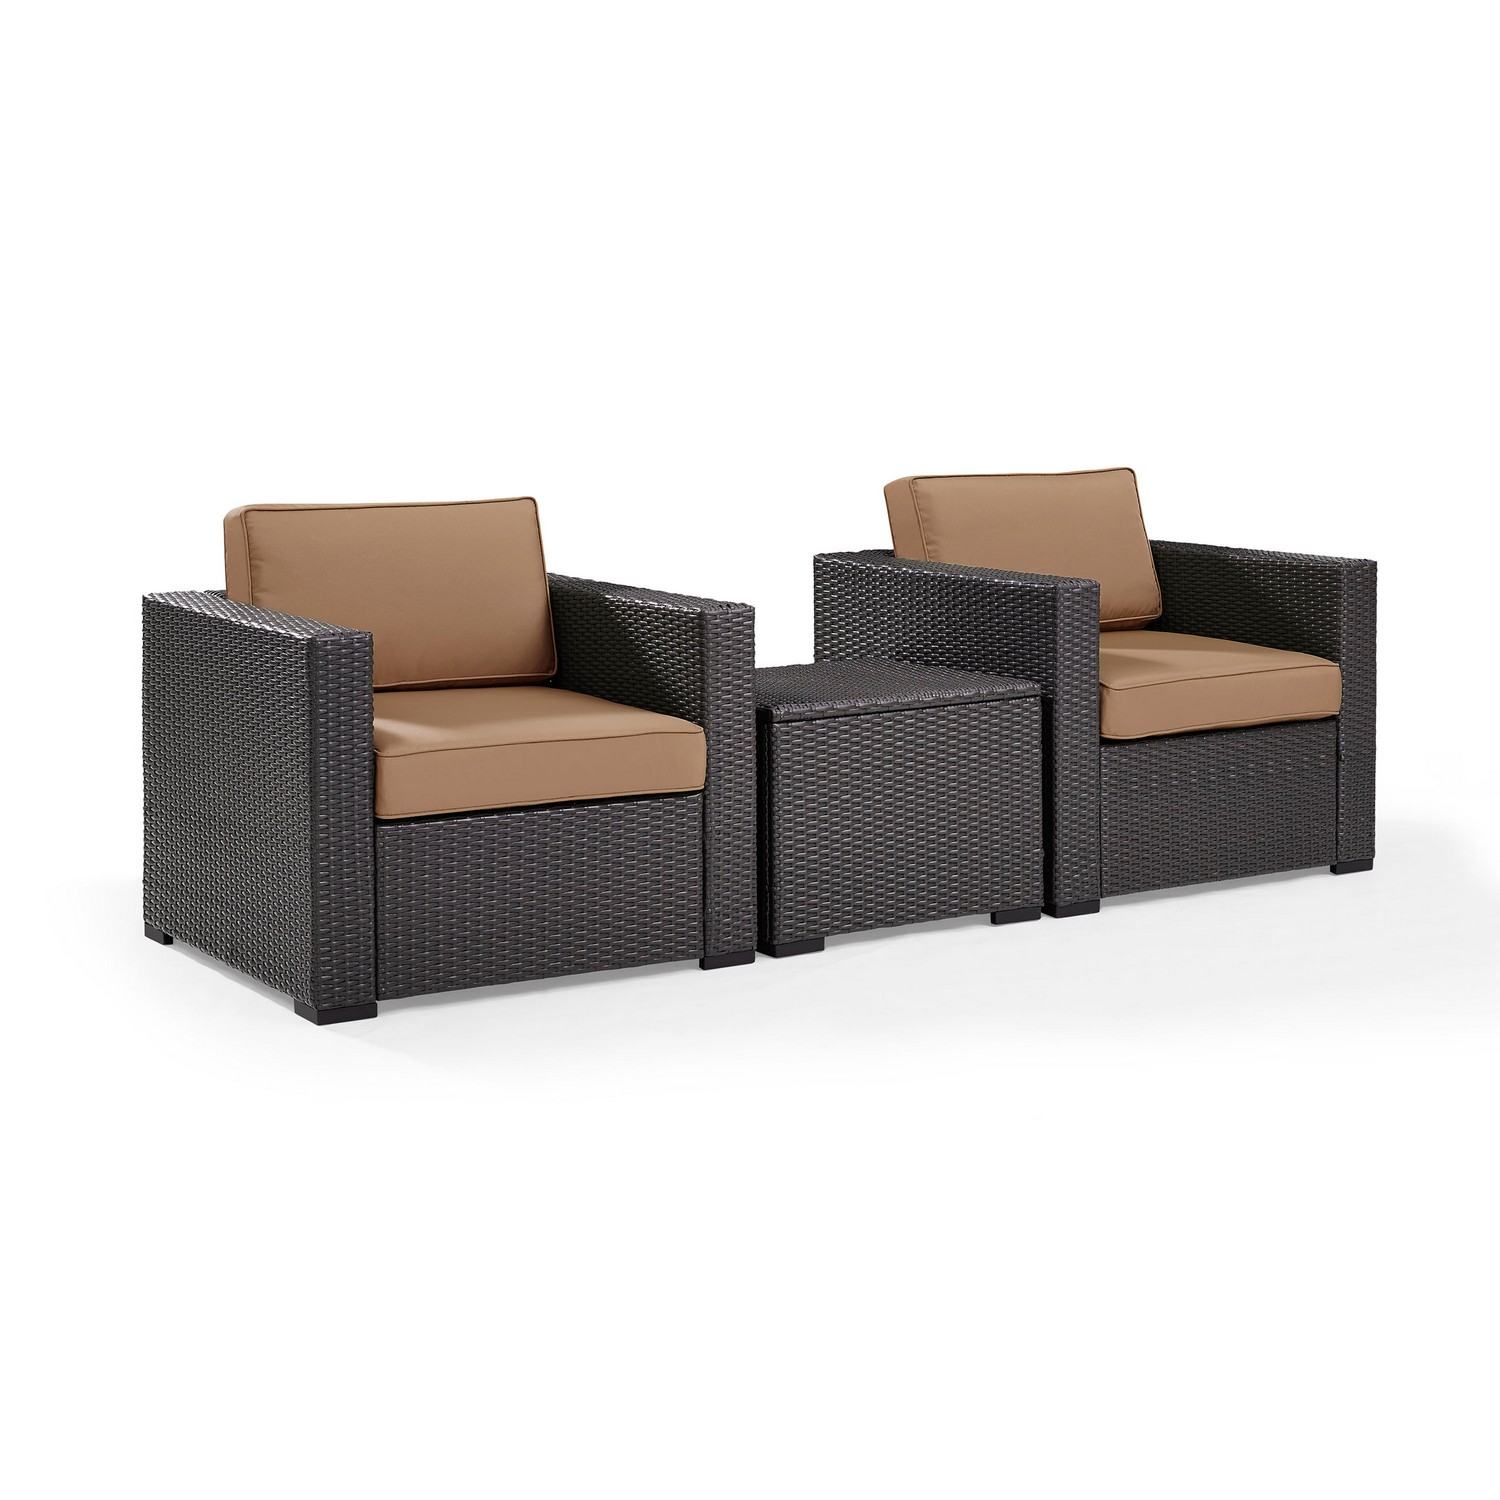 Crosley Biscayne 3-PC Outdoor Wicker Chair Set - Coffee Table and 2 Chairs - Mocha/Brown